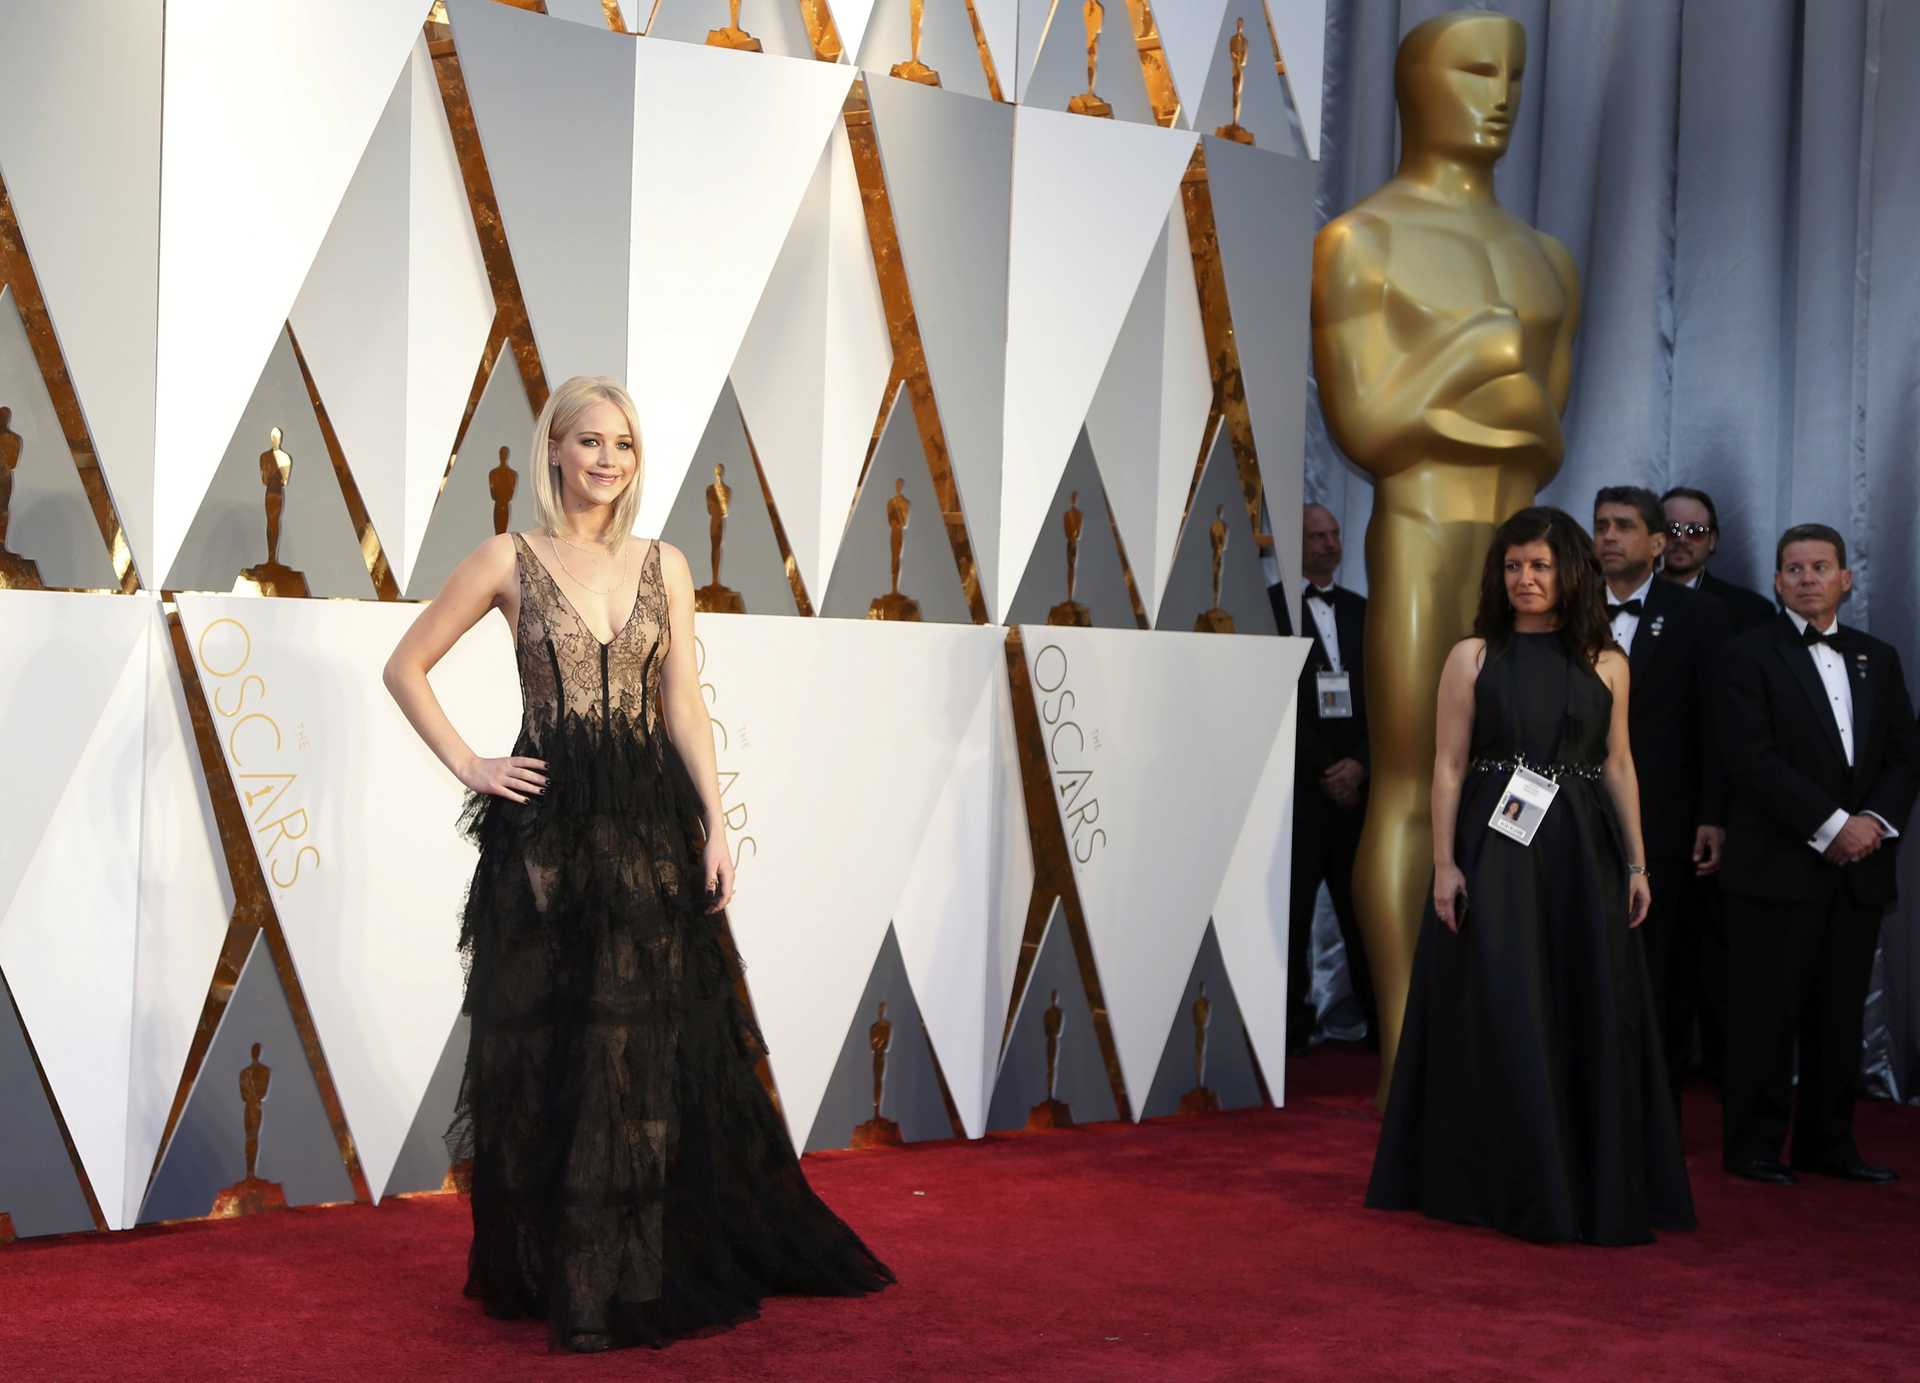 Jennifer Lawrence, nominated for Best Actress for her role in “Joy,” arrives at the 88th Academy Awards in Hollywood